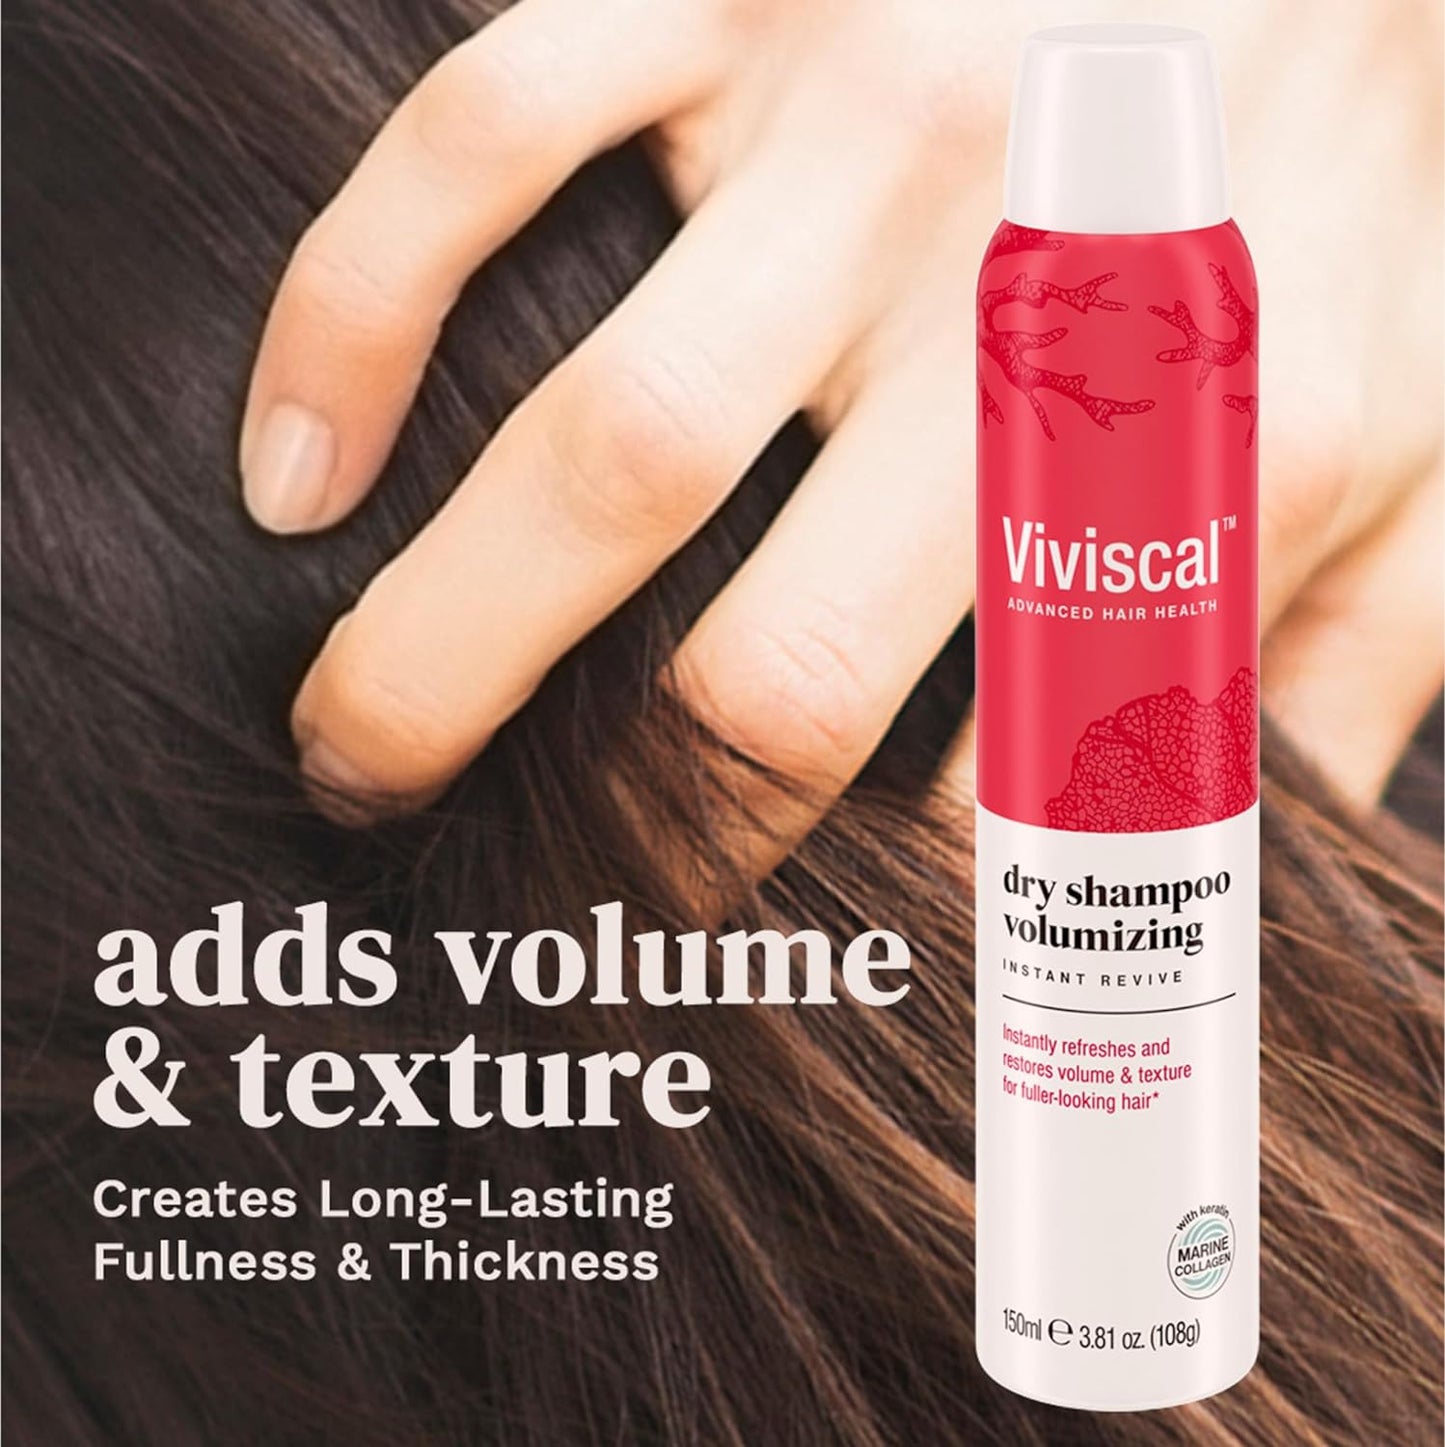 Viviscal dry shampoo volumizing instant revive add volumes and texture to create long-lasting fullness and thickness